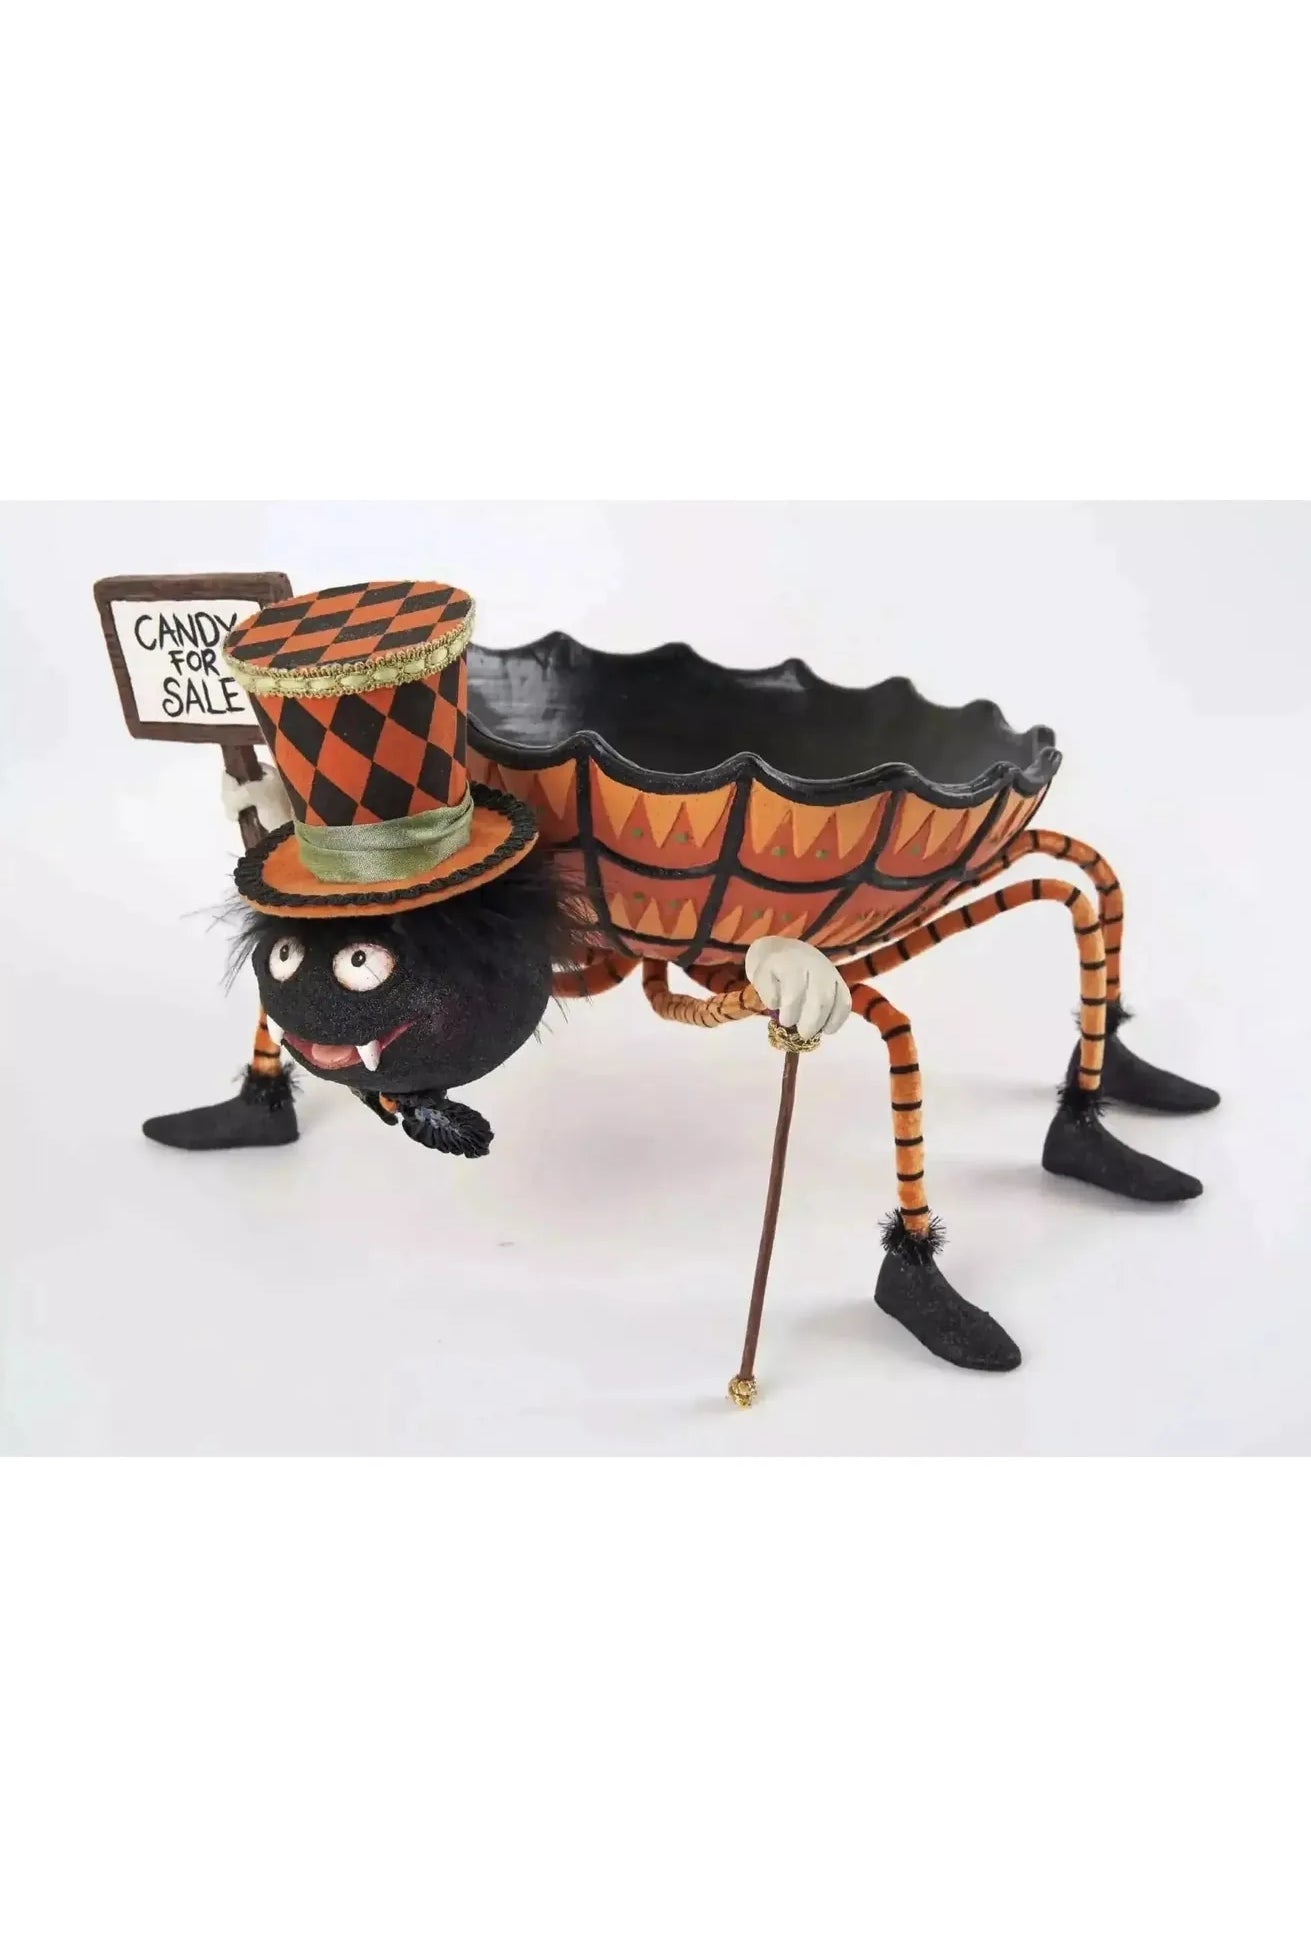 Shop For Katherine's Collection 14.75" Bewitching Bash Spider Candy Dish Halloween Decoration 28-128107